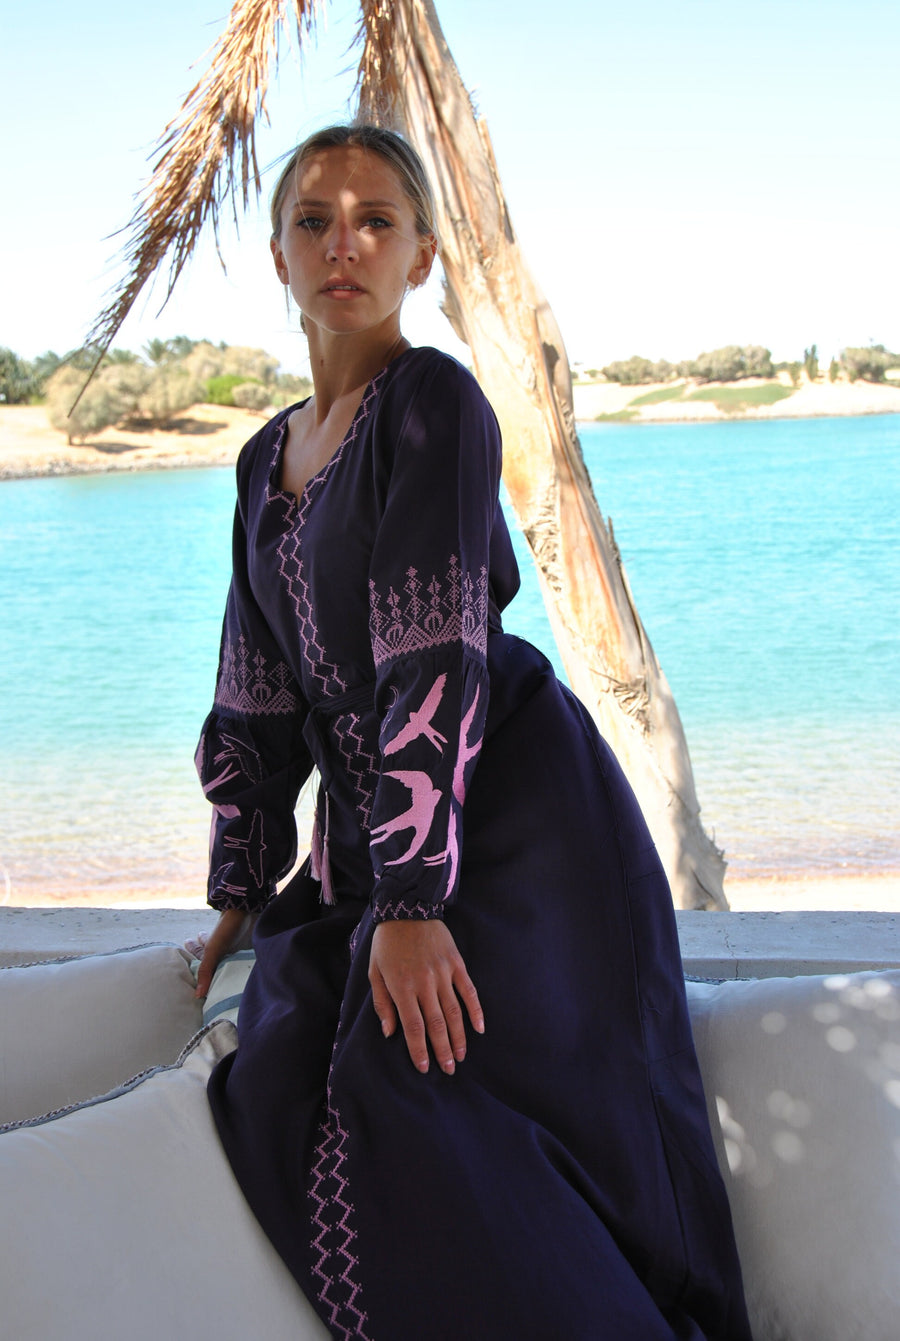 Purple Cotton Caftan with belt, birds embroidery, caftans for women, embroidered Caftan dress, Caftan maxi dress, Caftans for women, Caftans